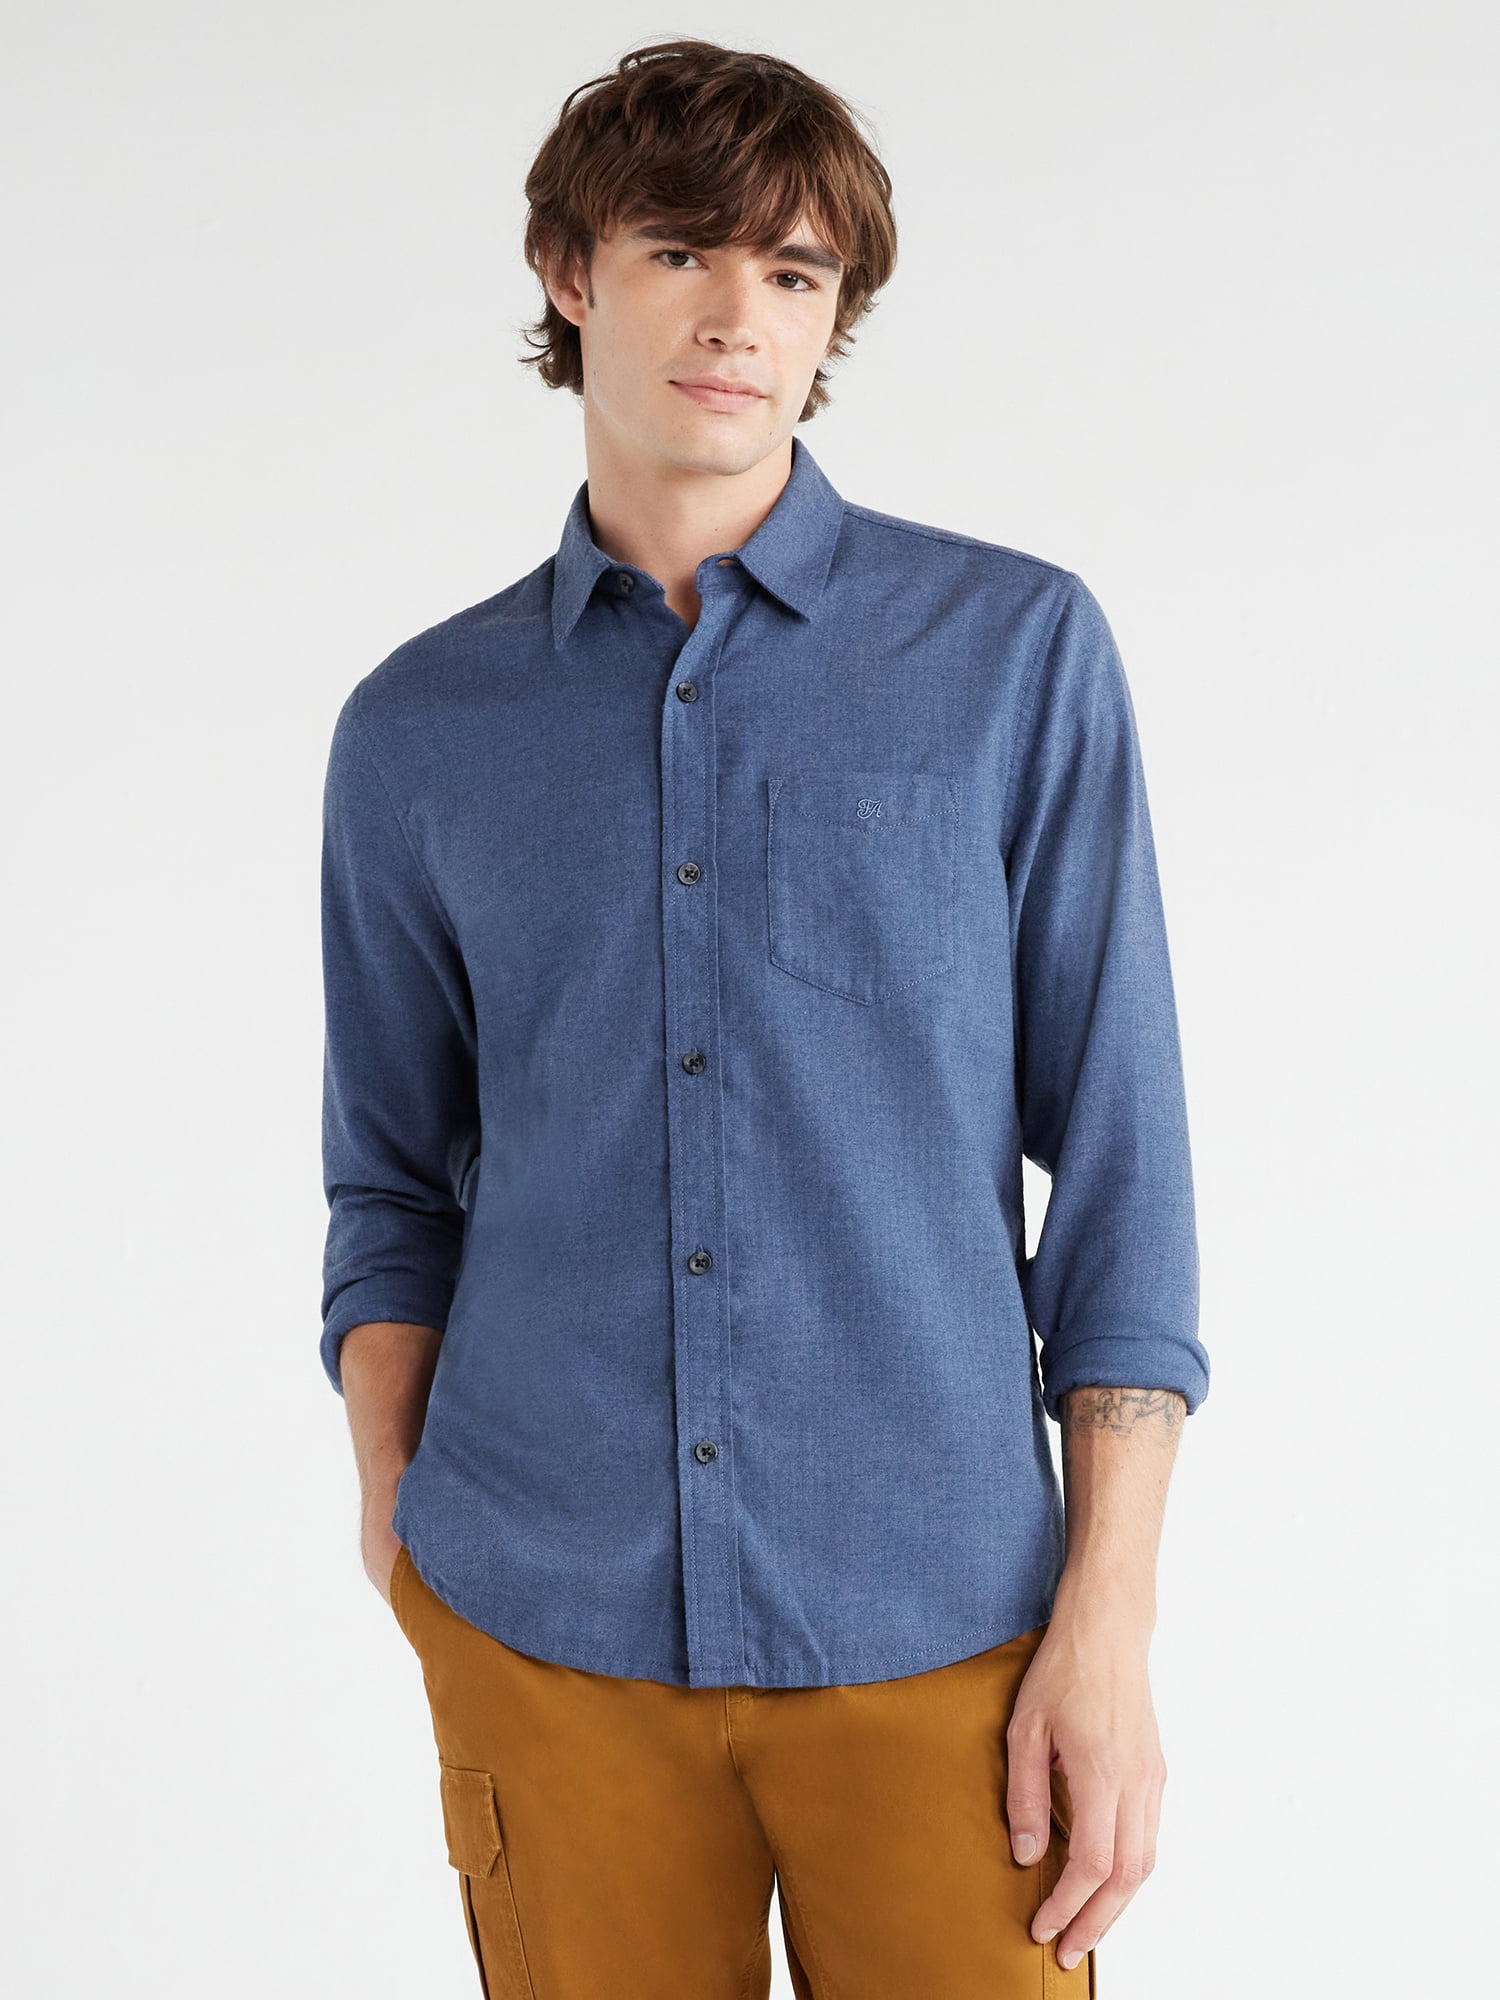 Free Assembly Men's Herringbone Shirt with Long Sleeves, Sizes XS-3XL ...